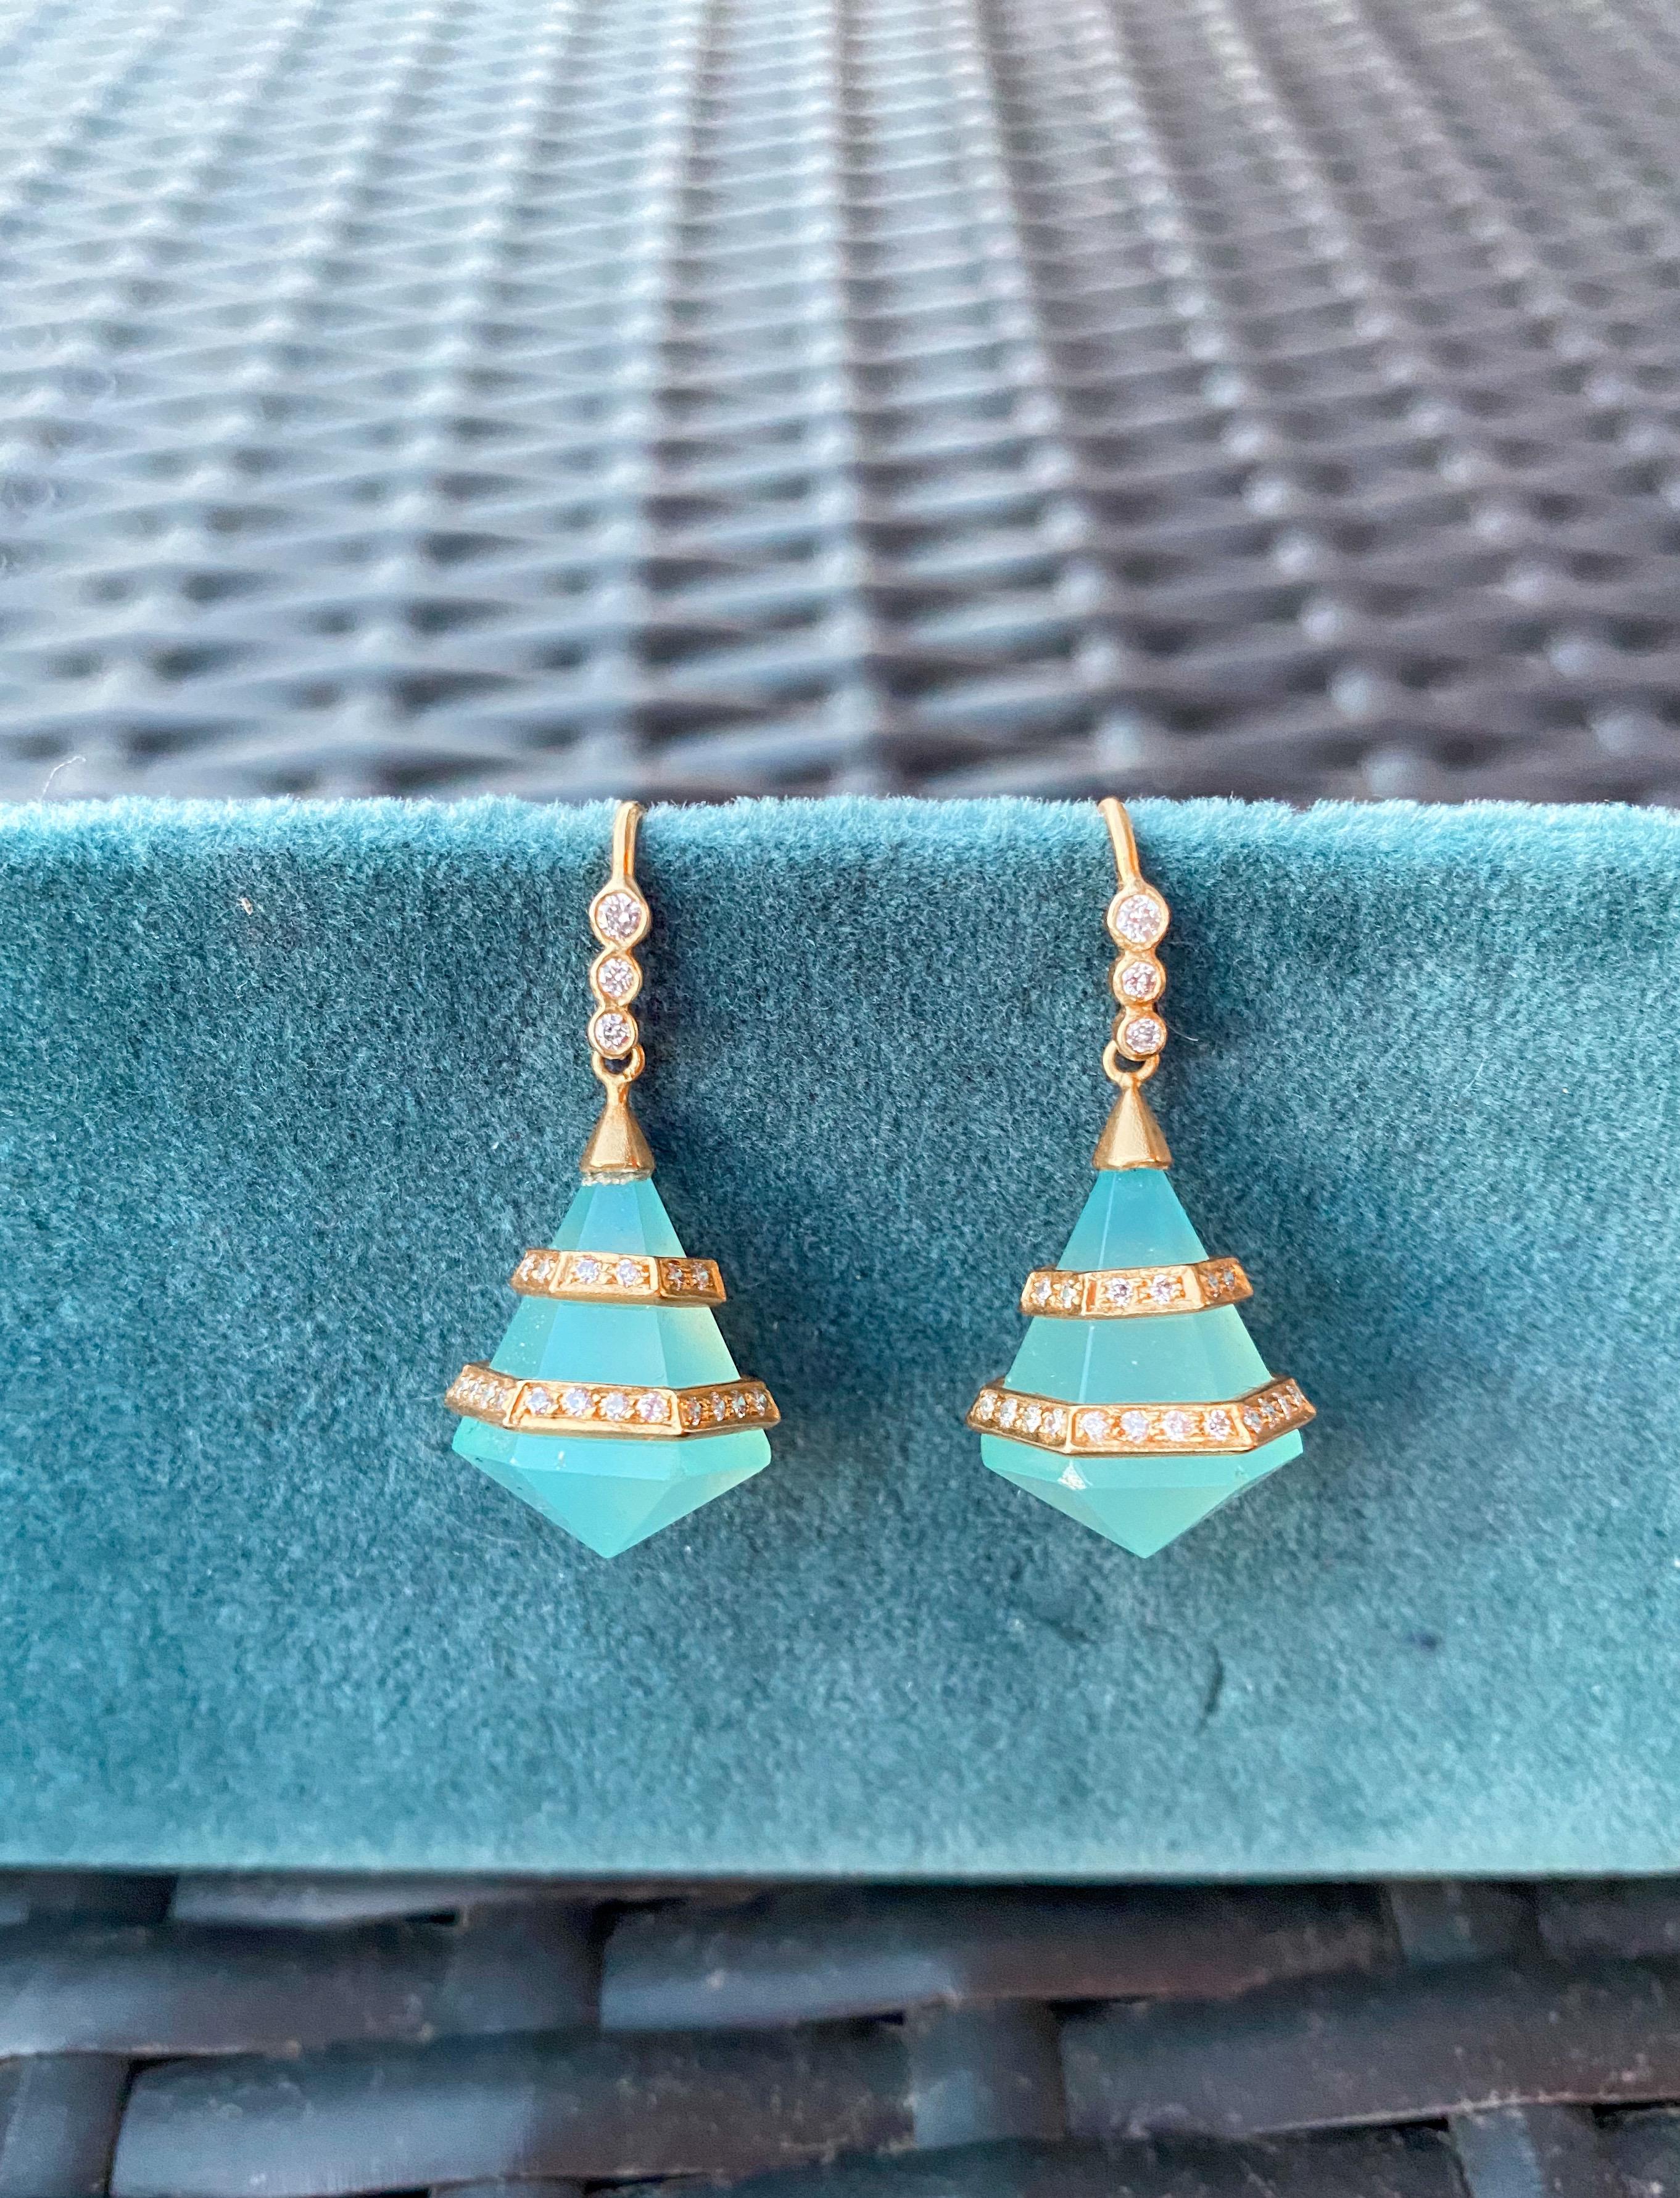 Geometric pyramid cut Chalcedony stones are surrounded by architectural bands of 18kt Gold and diamonds.  Finished in Lauren Harper's signature matte gold finish, these earrings are great for day or night wear.  Special and uniquely geometric, these